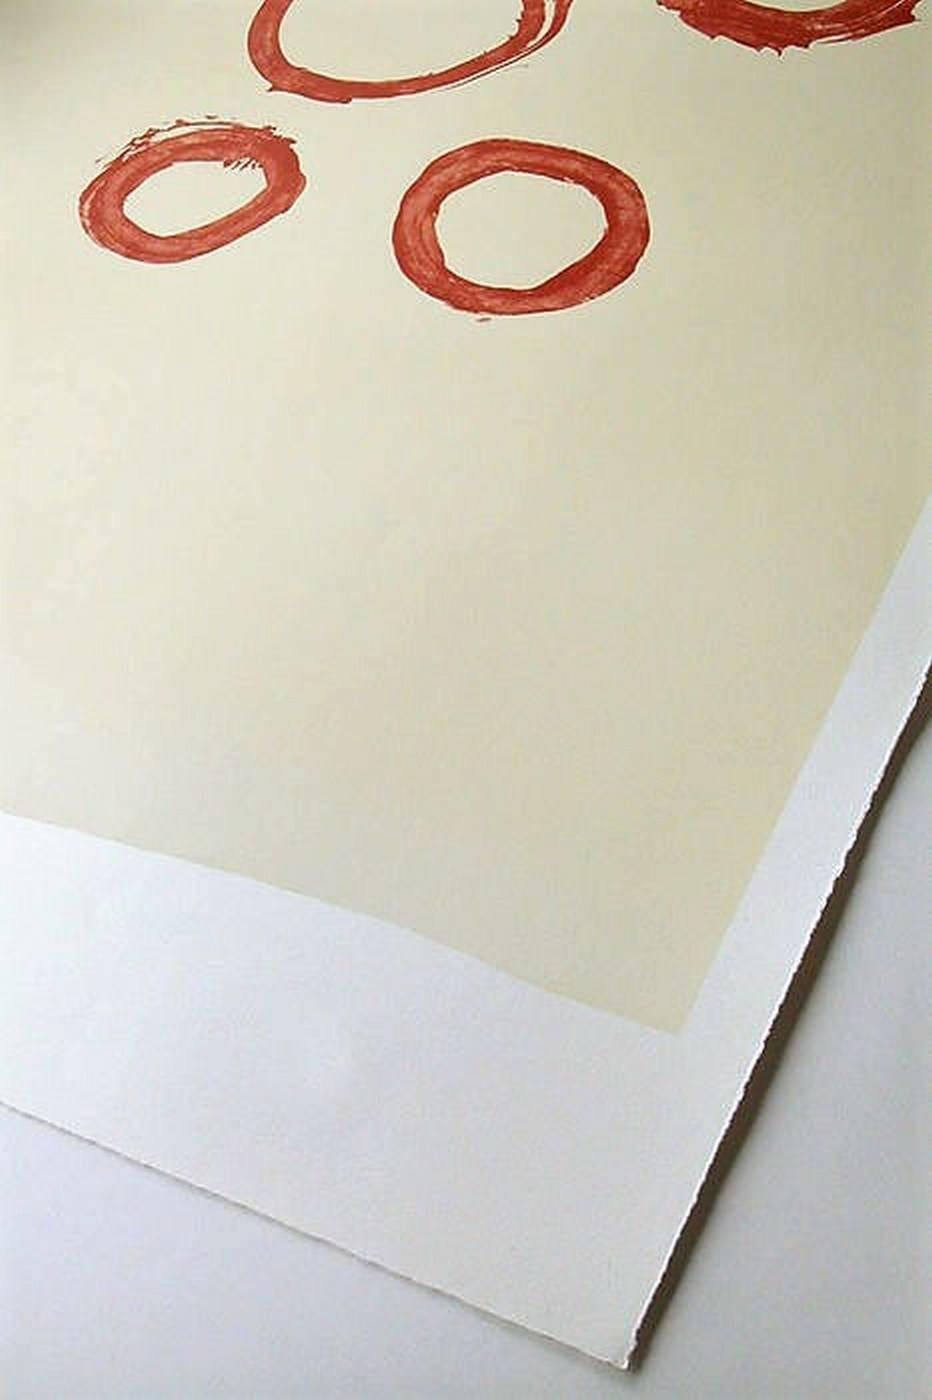 Five Circles - Abstract Print by Robert Motherwell